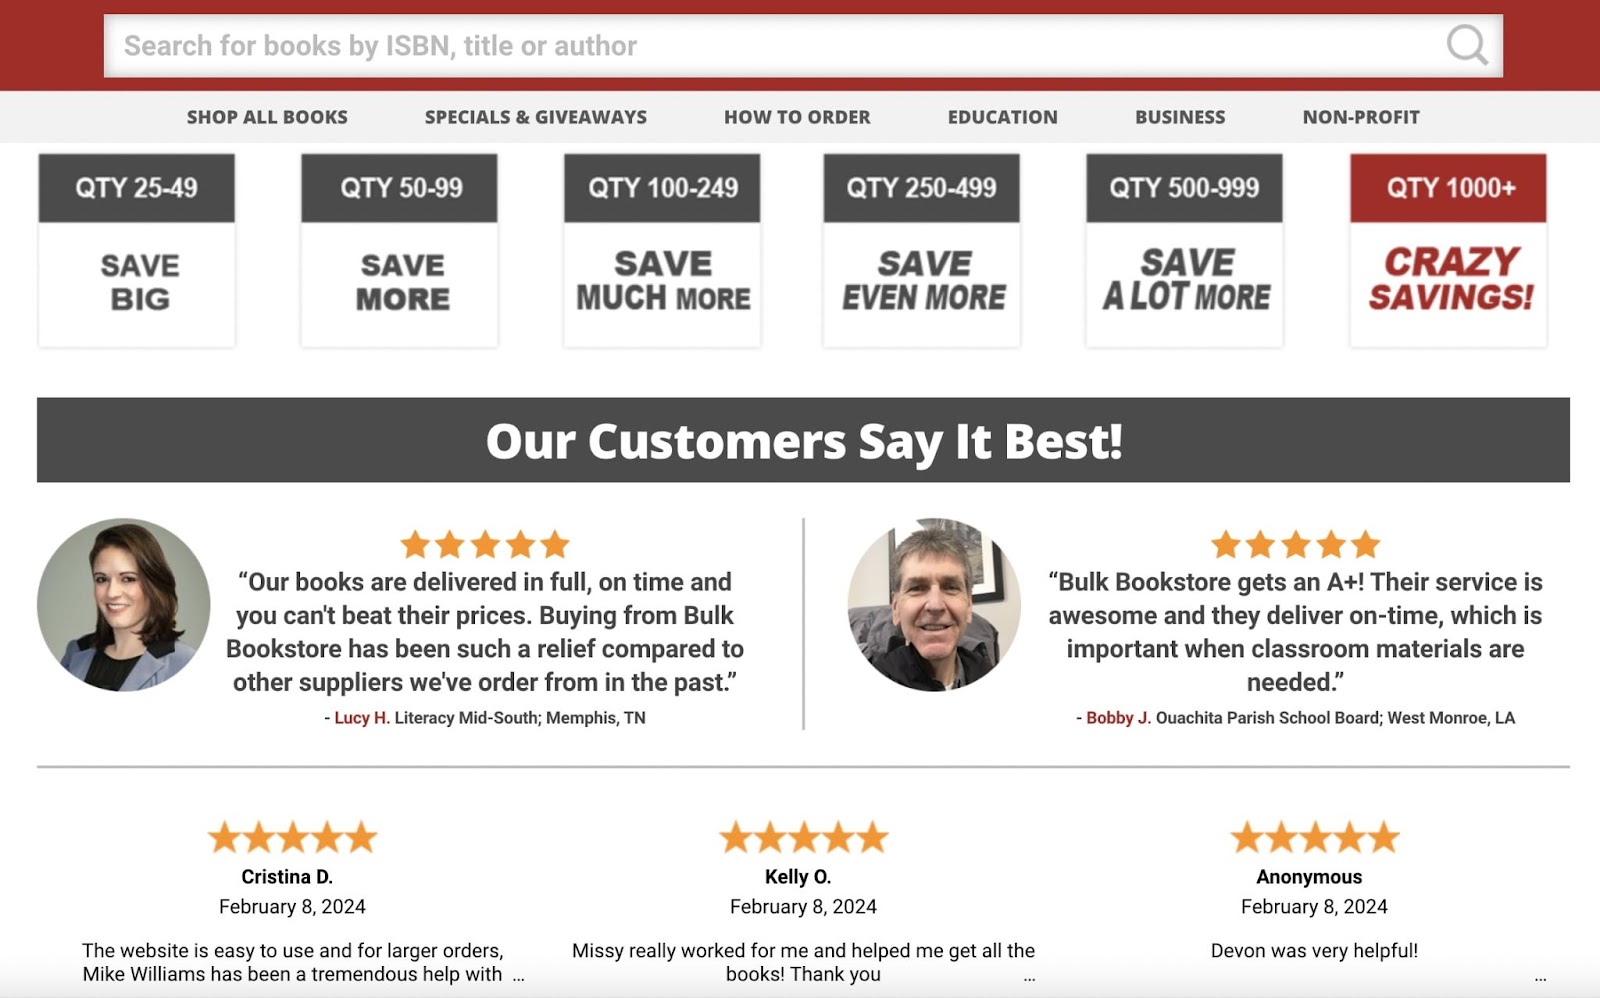 Reviews and recommendations section of Bulk Bookstore's homepage